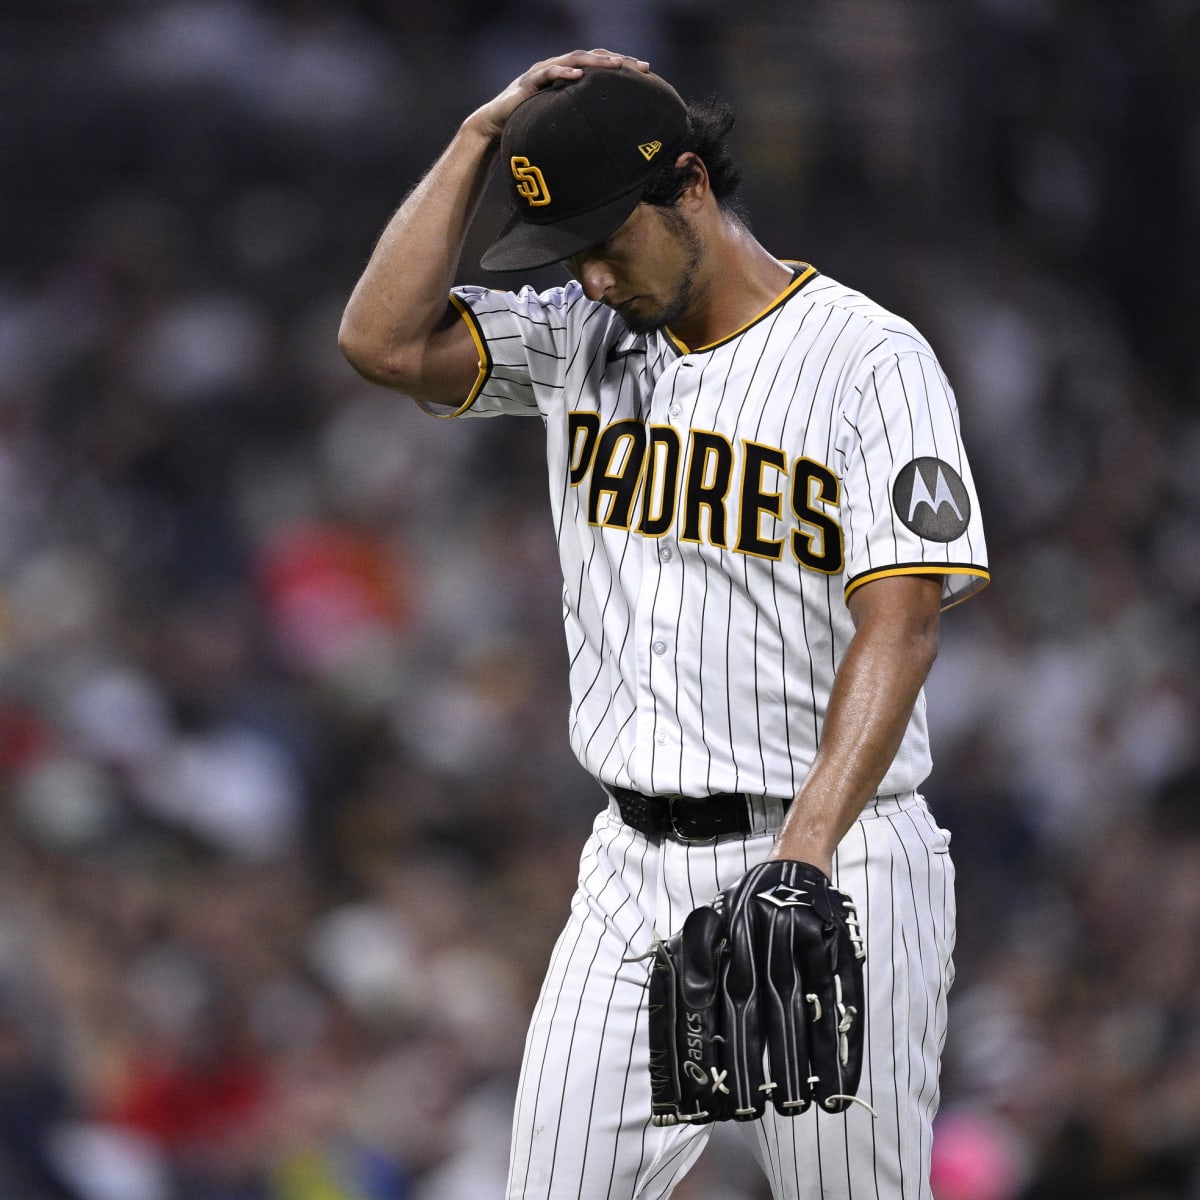 Darvish departs early with back tightness, Padres can't add on in déjà vu  loss to Diamondbacks - The San Diego Union-Tribune